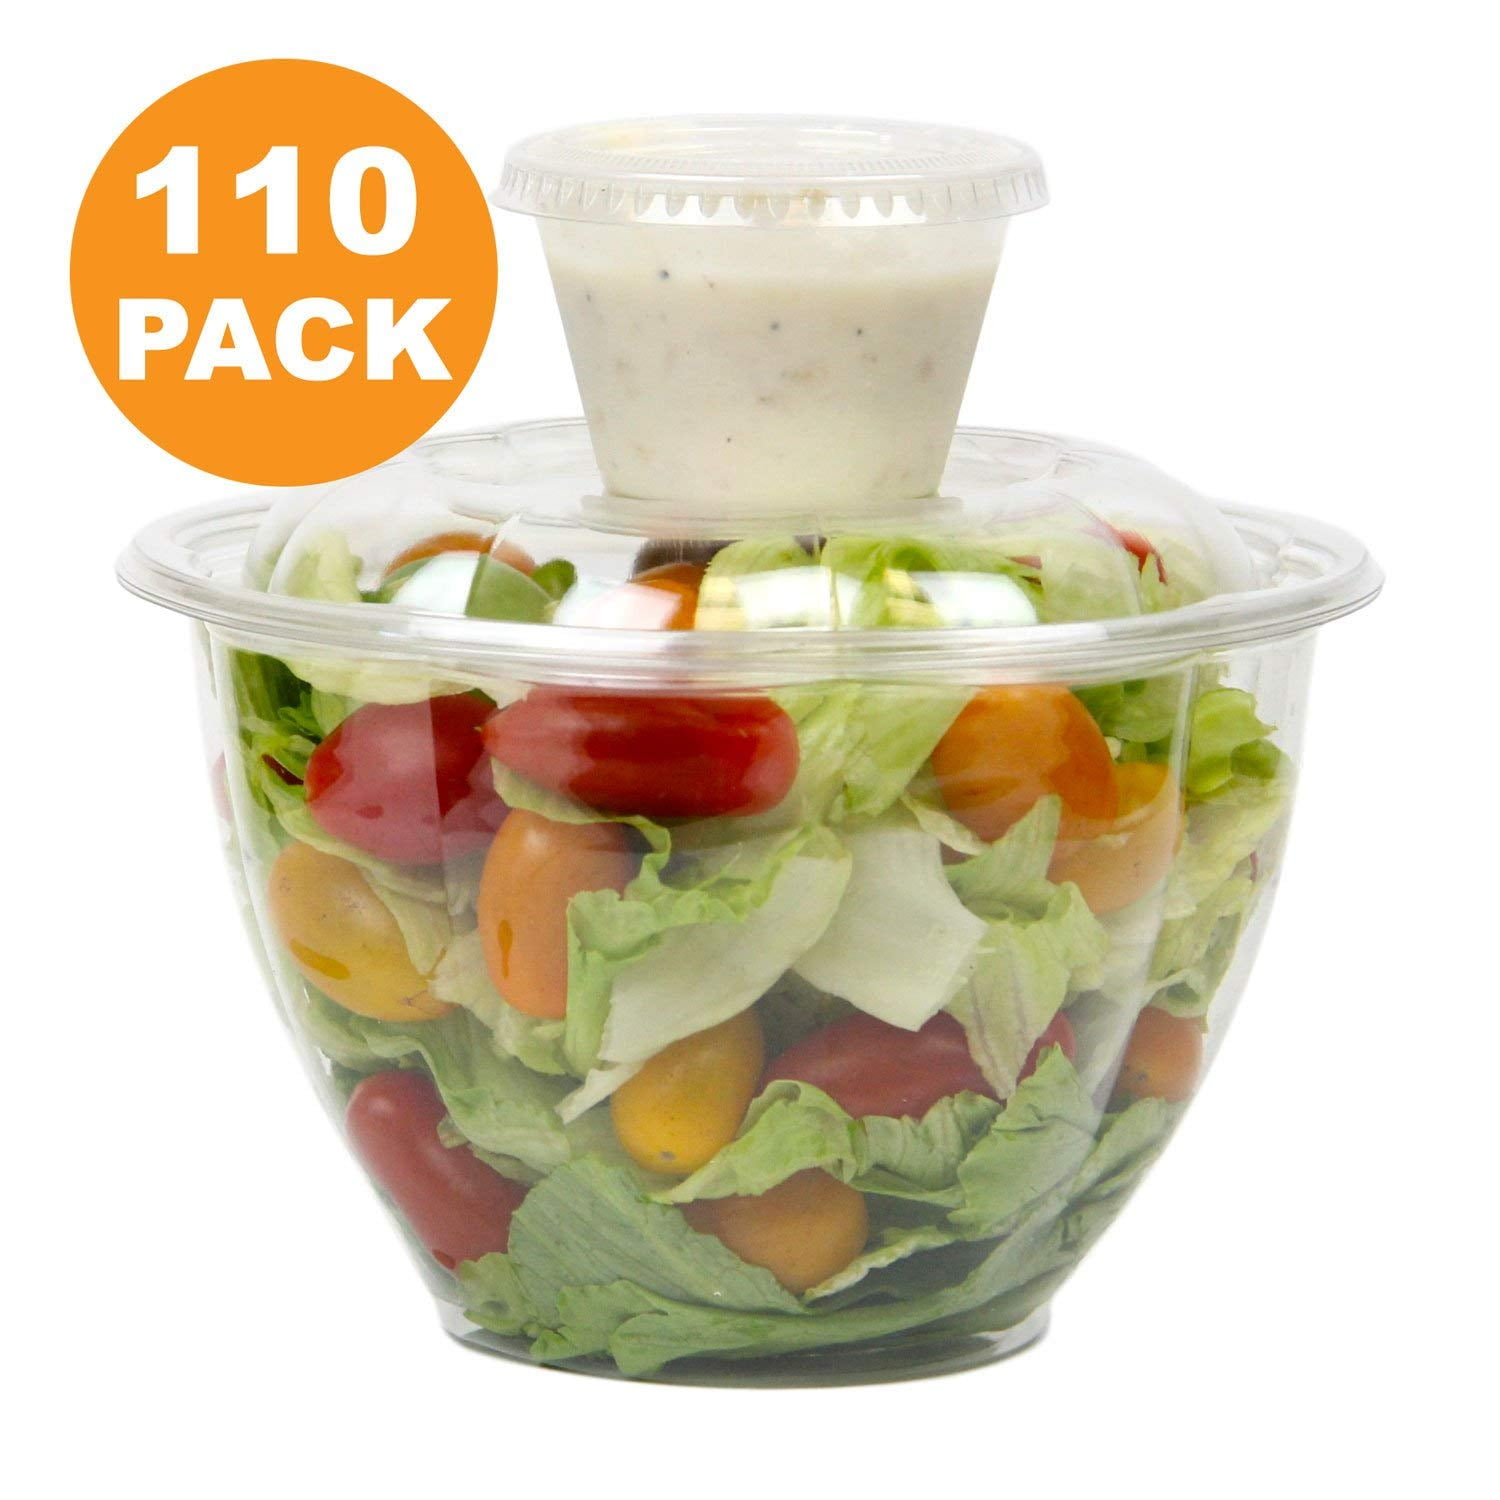 64oz Container Compartment, Sauce Container, Salad Container, Salad Bowl